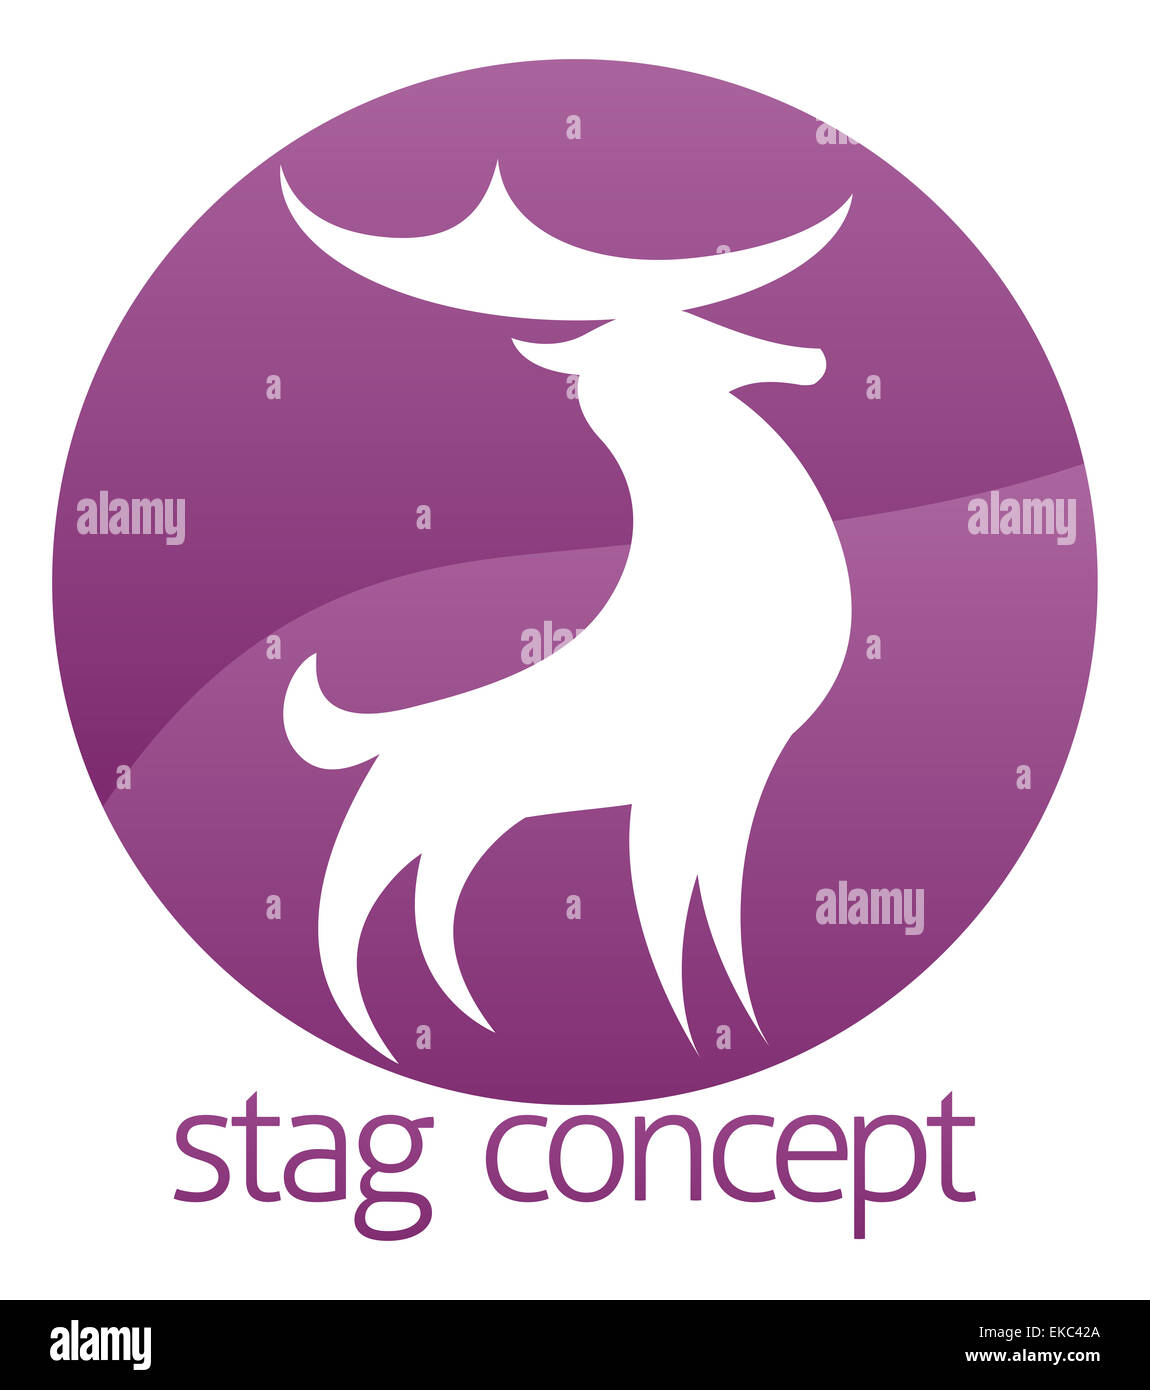 Conceptual design of a stylised proud stag or deer with large antlers circle concept design Stock Photo